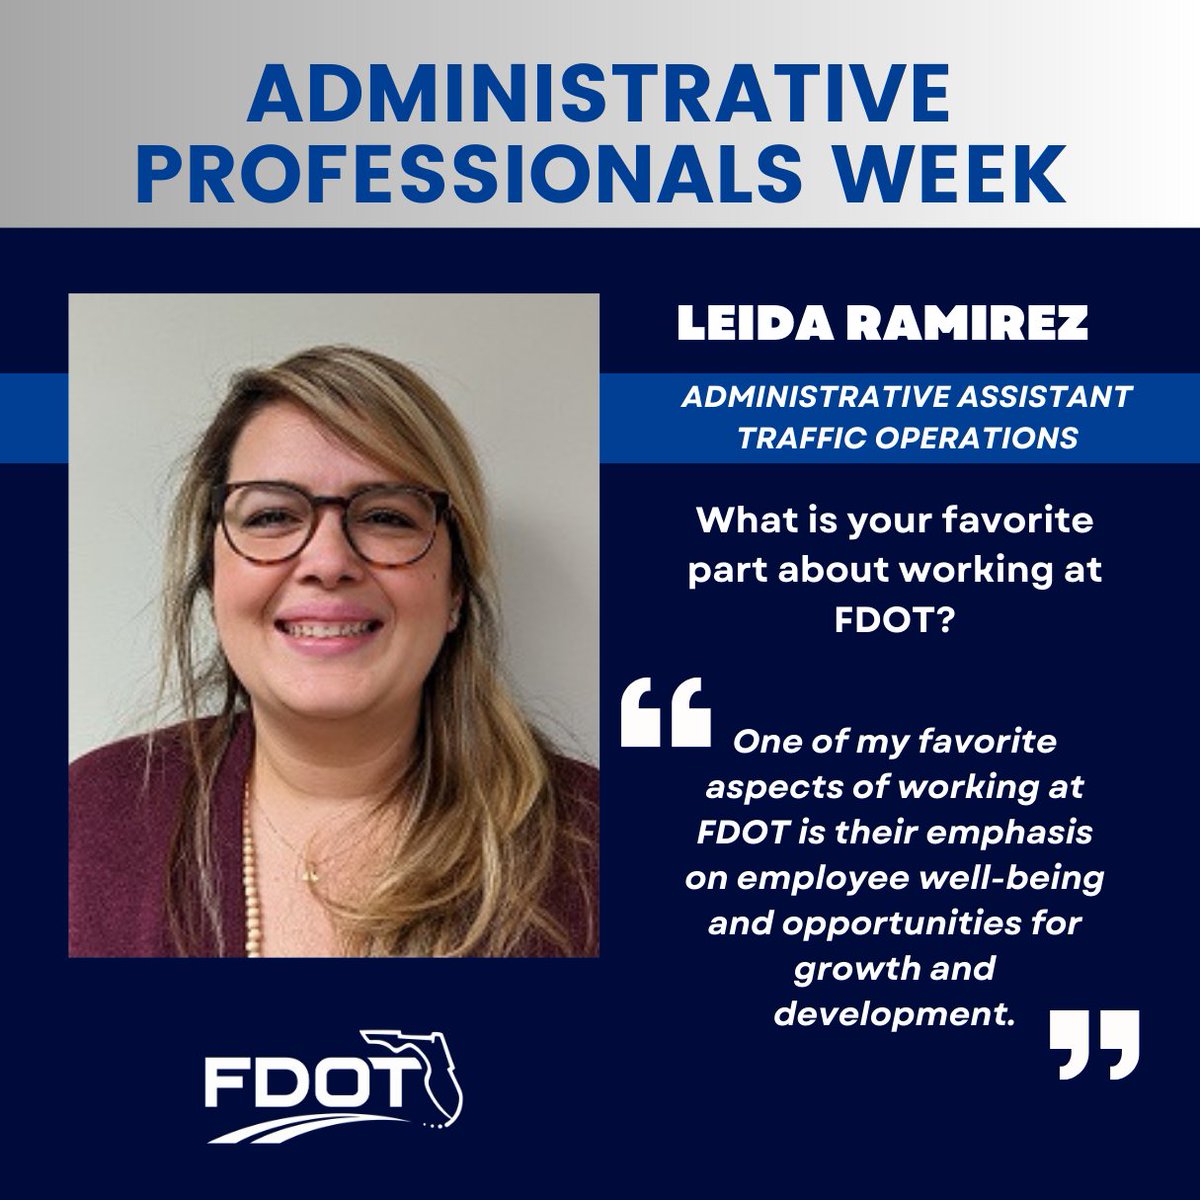 Meet Leida Ramirez, Administrative Assistant - Traffic Operations, who has been with the Department for two years. Thank you for all your hard work and dedication Leida! #AdministrativeProfessionalsWeek